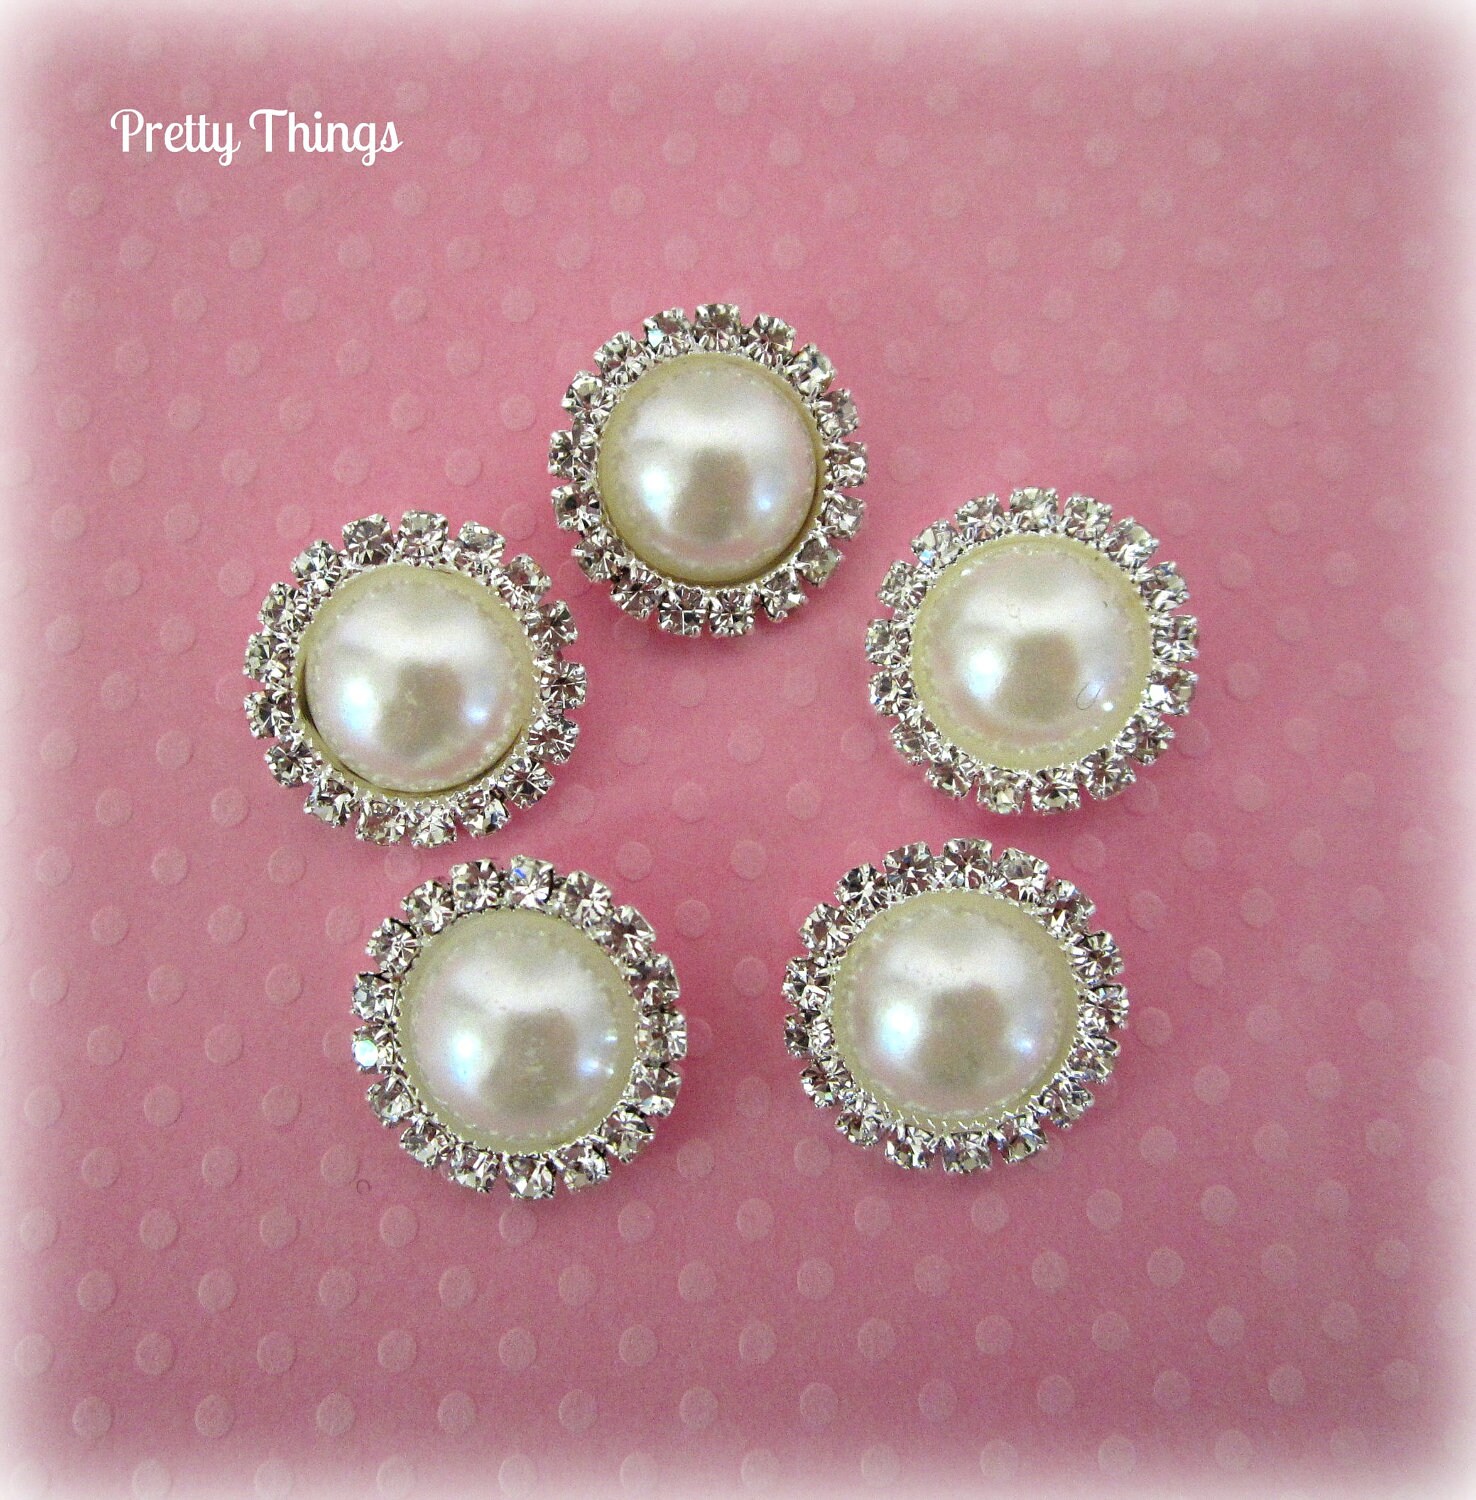 Ivory Pearl Buttons with Rhinestones. QTY: Set of 3 Buttons.